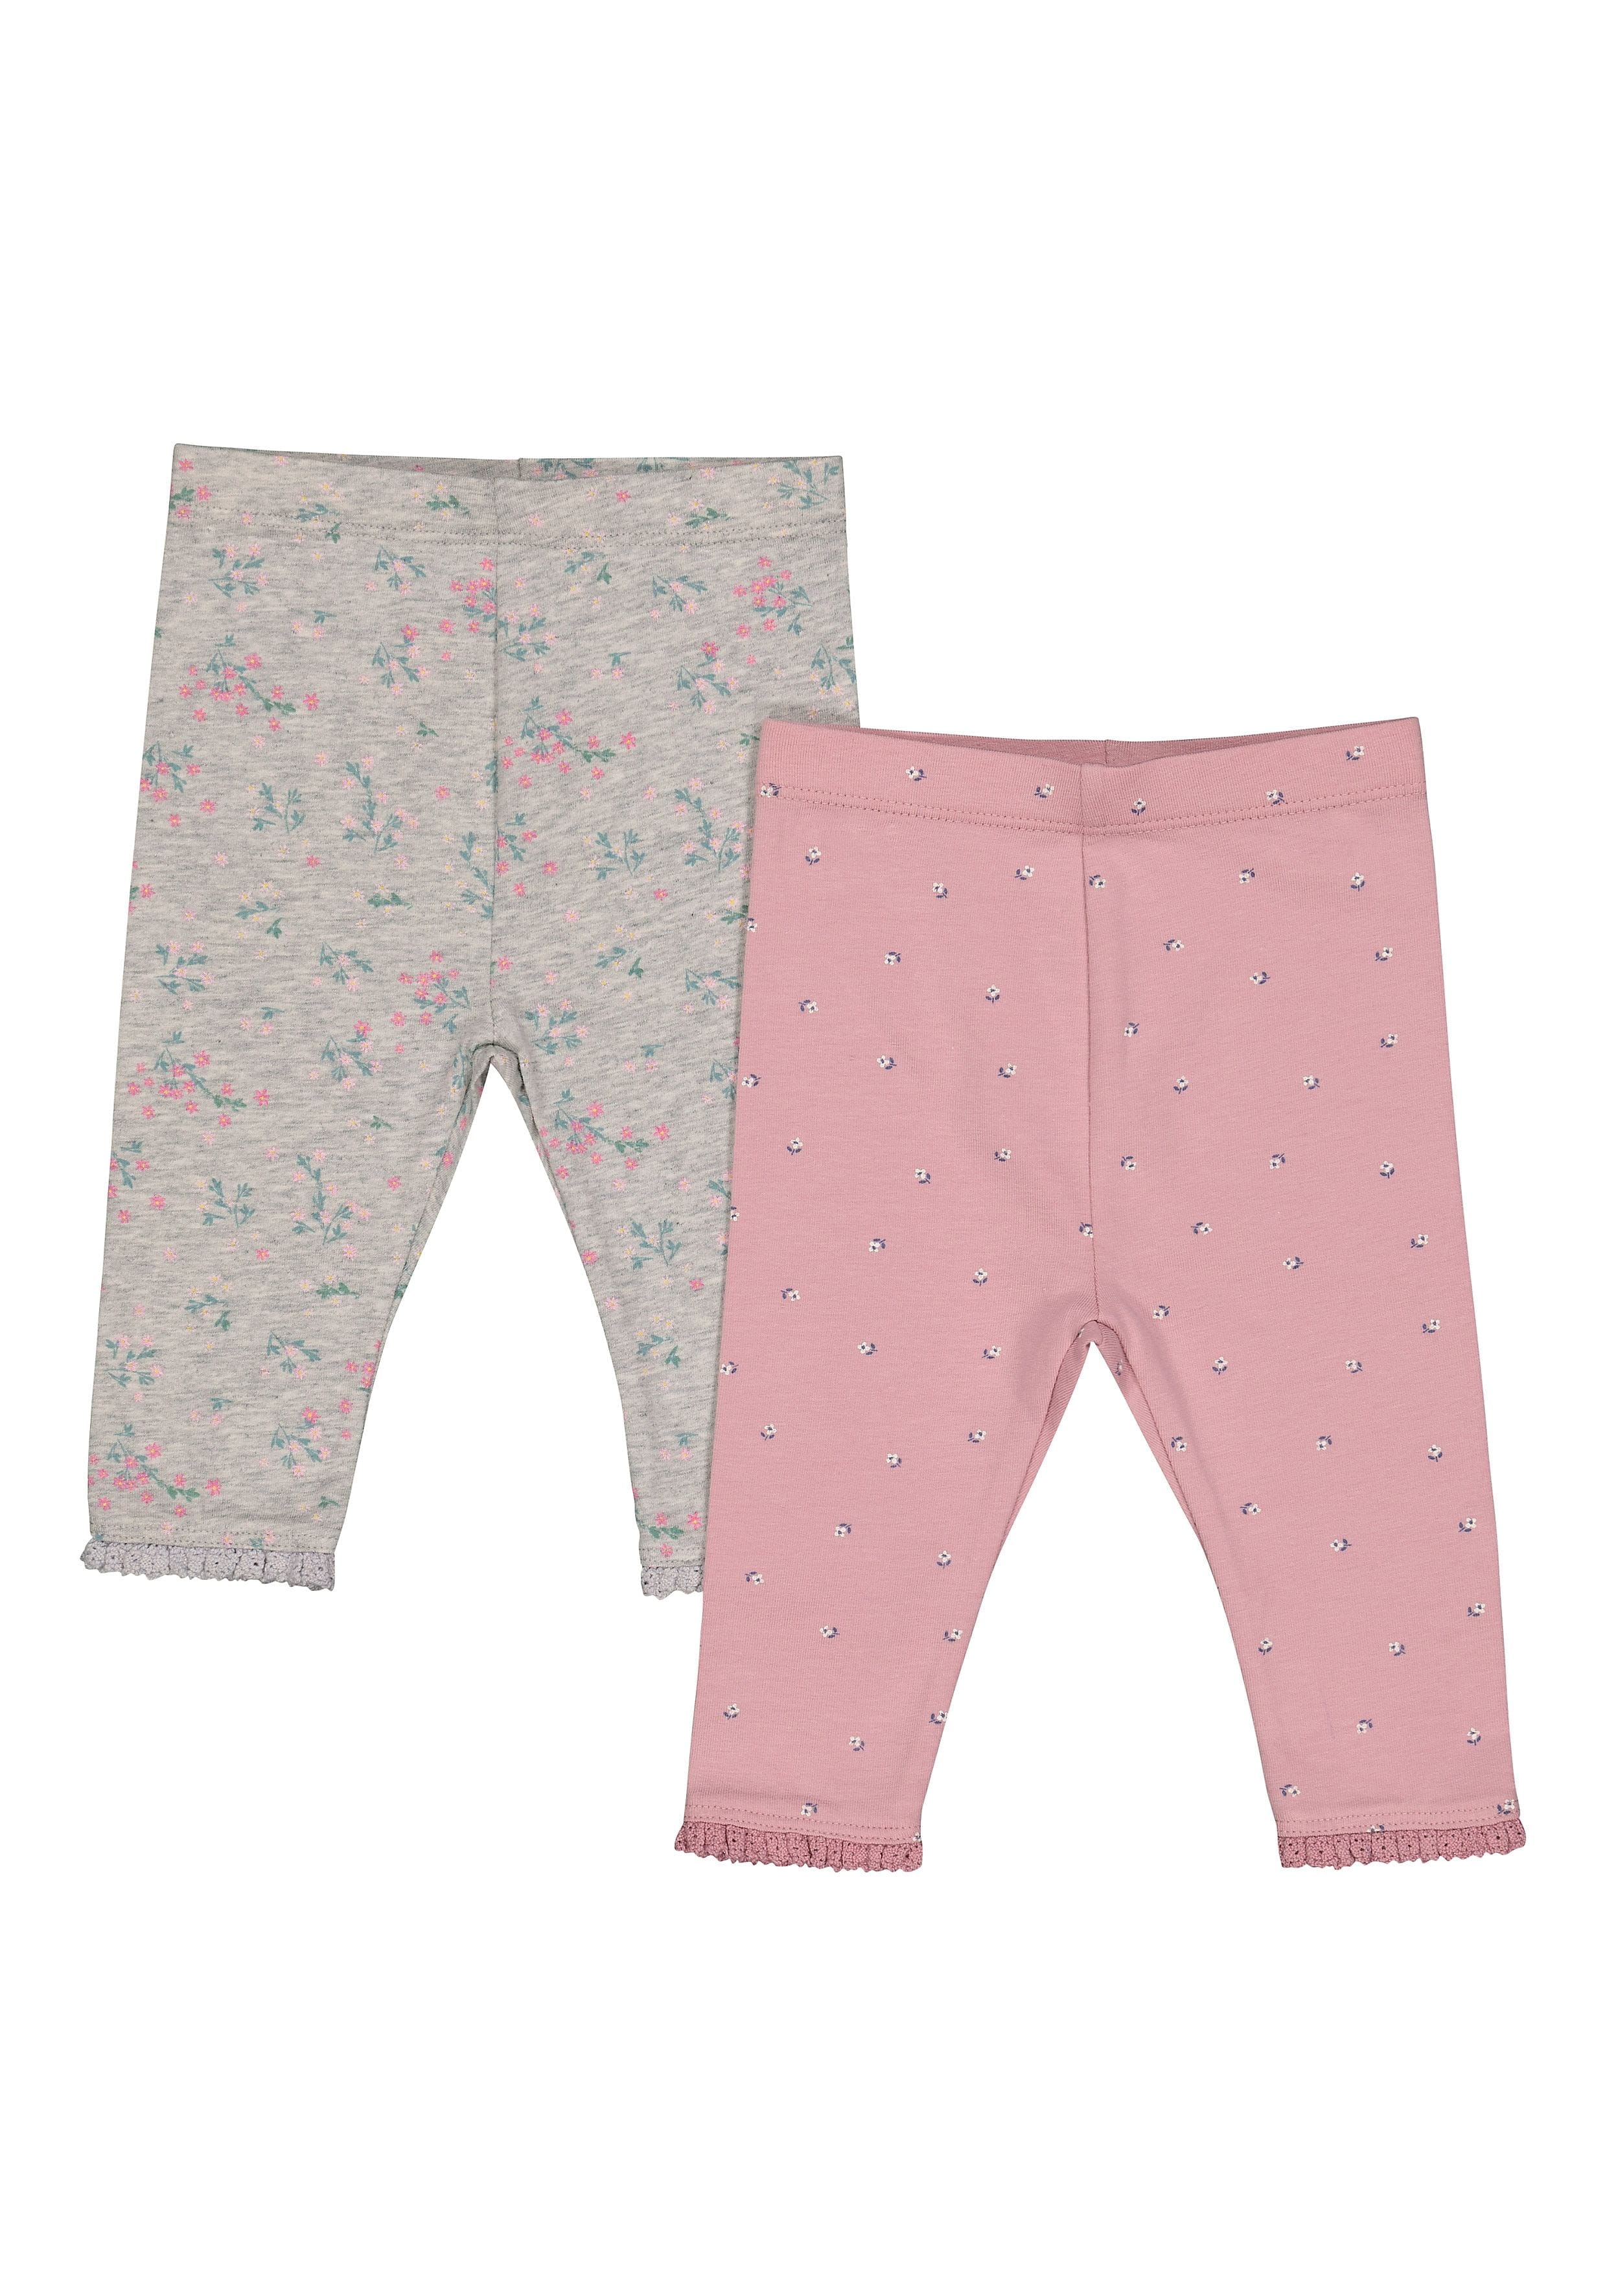 Mothercare | Pink And Grey Floral Leggings - 2 Pack 0